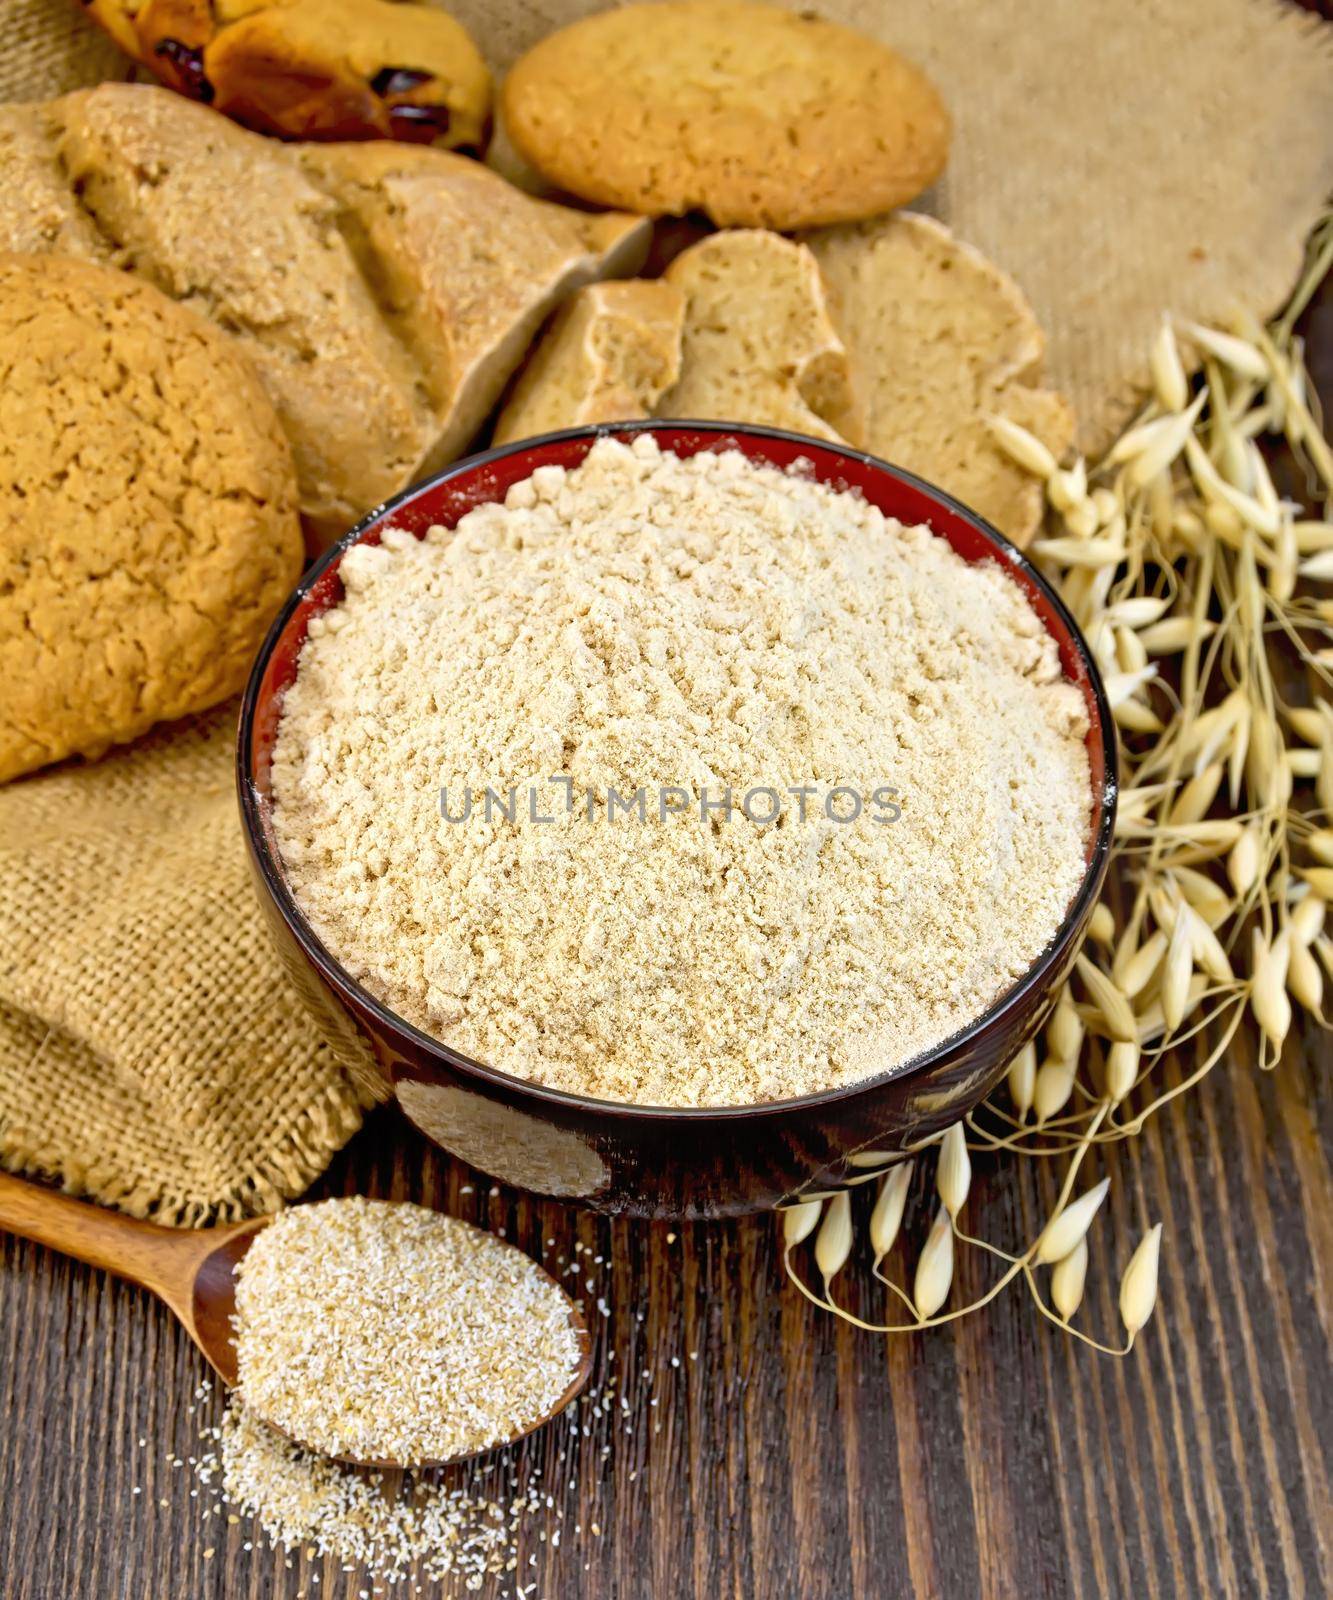 Oat flour in a bowl, bag with oat and stalks of oats, biscuits and bread, oatmeal on the background of wooden boards